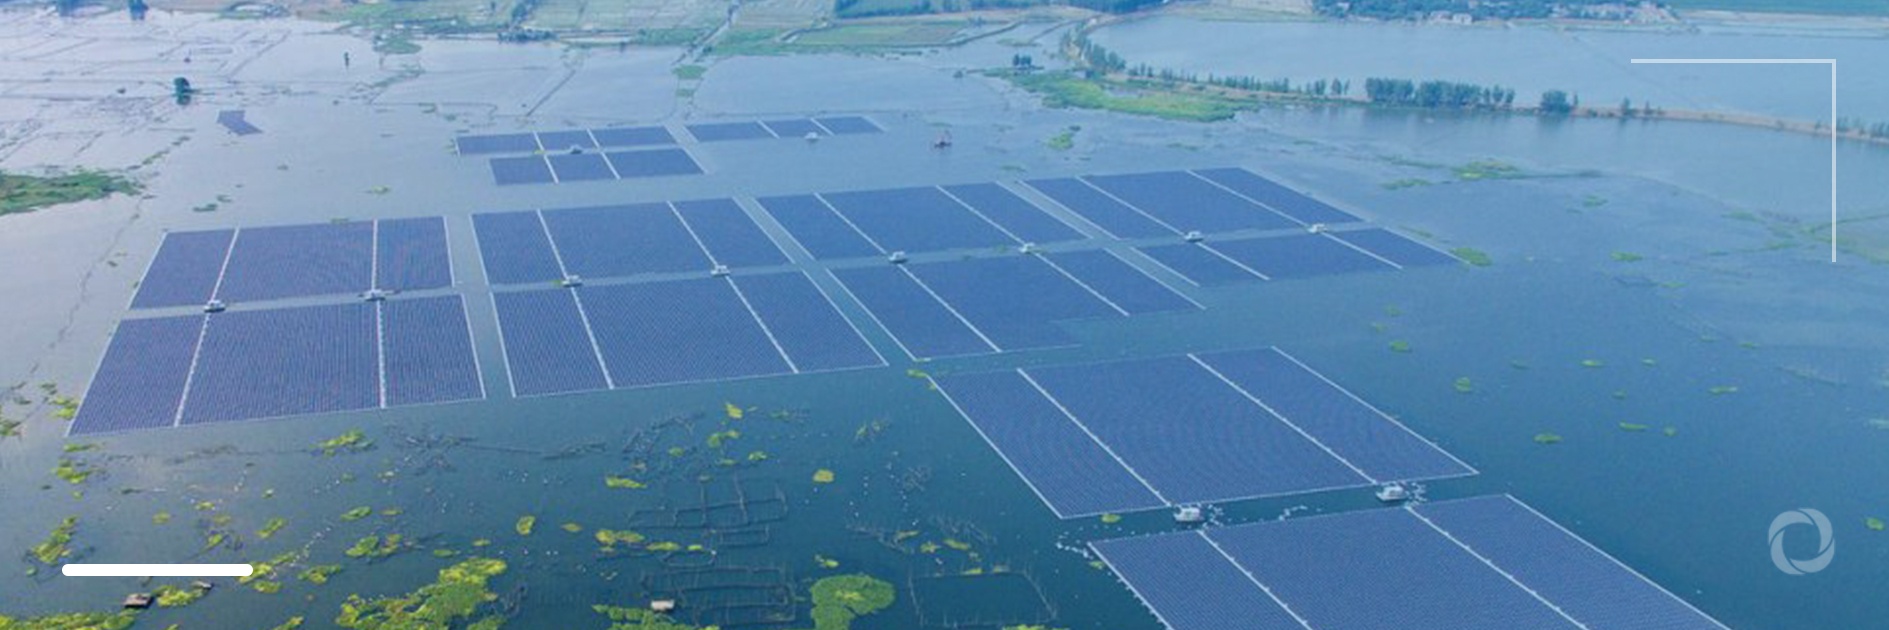 Thailand close to completion of one of world’s biggest floating solar power projects